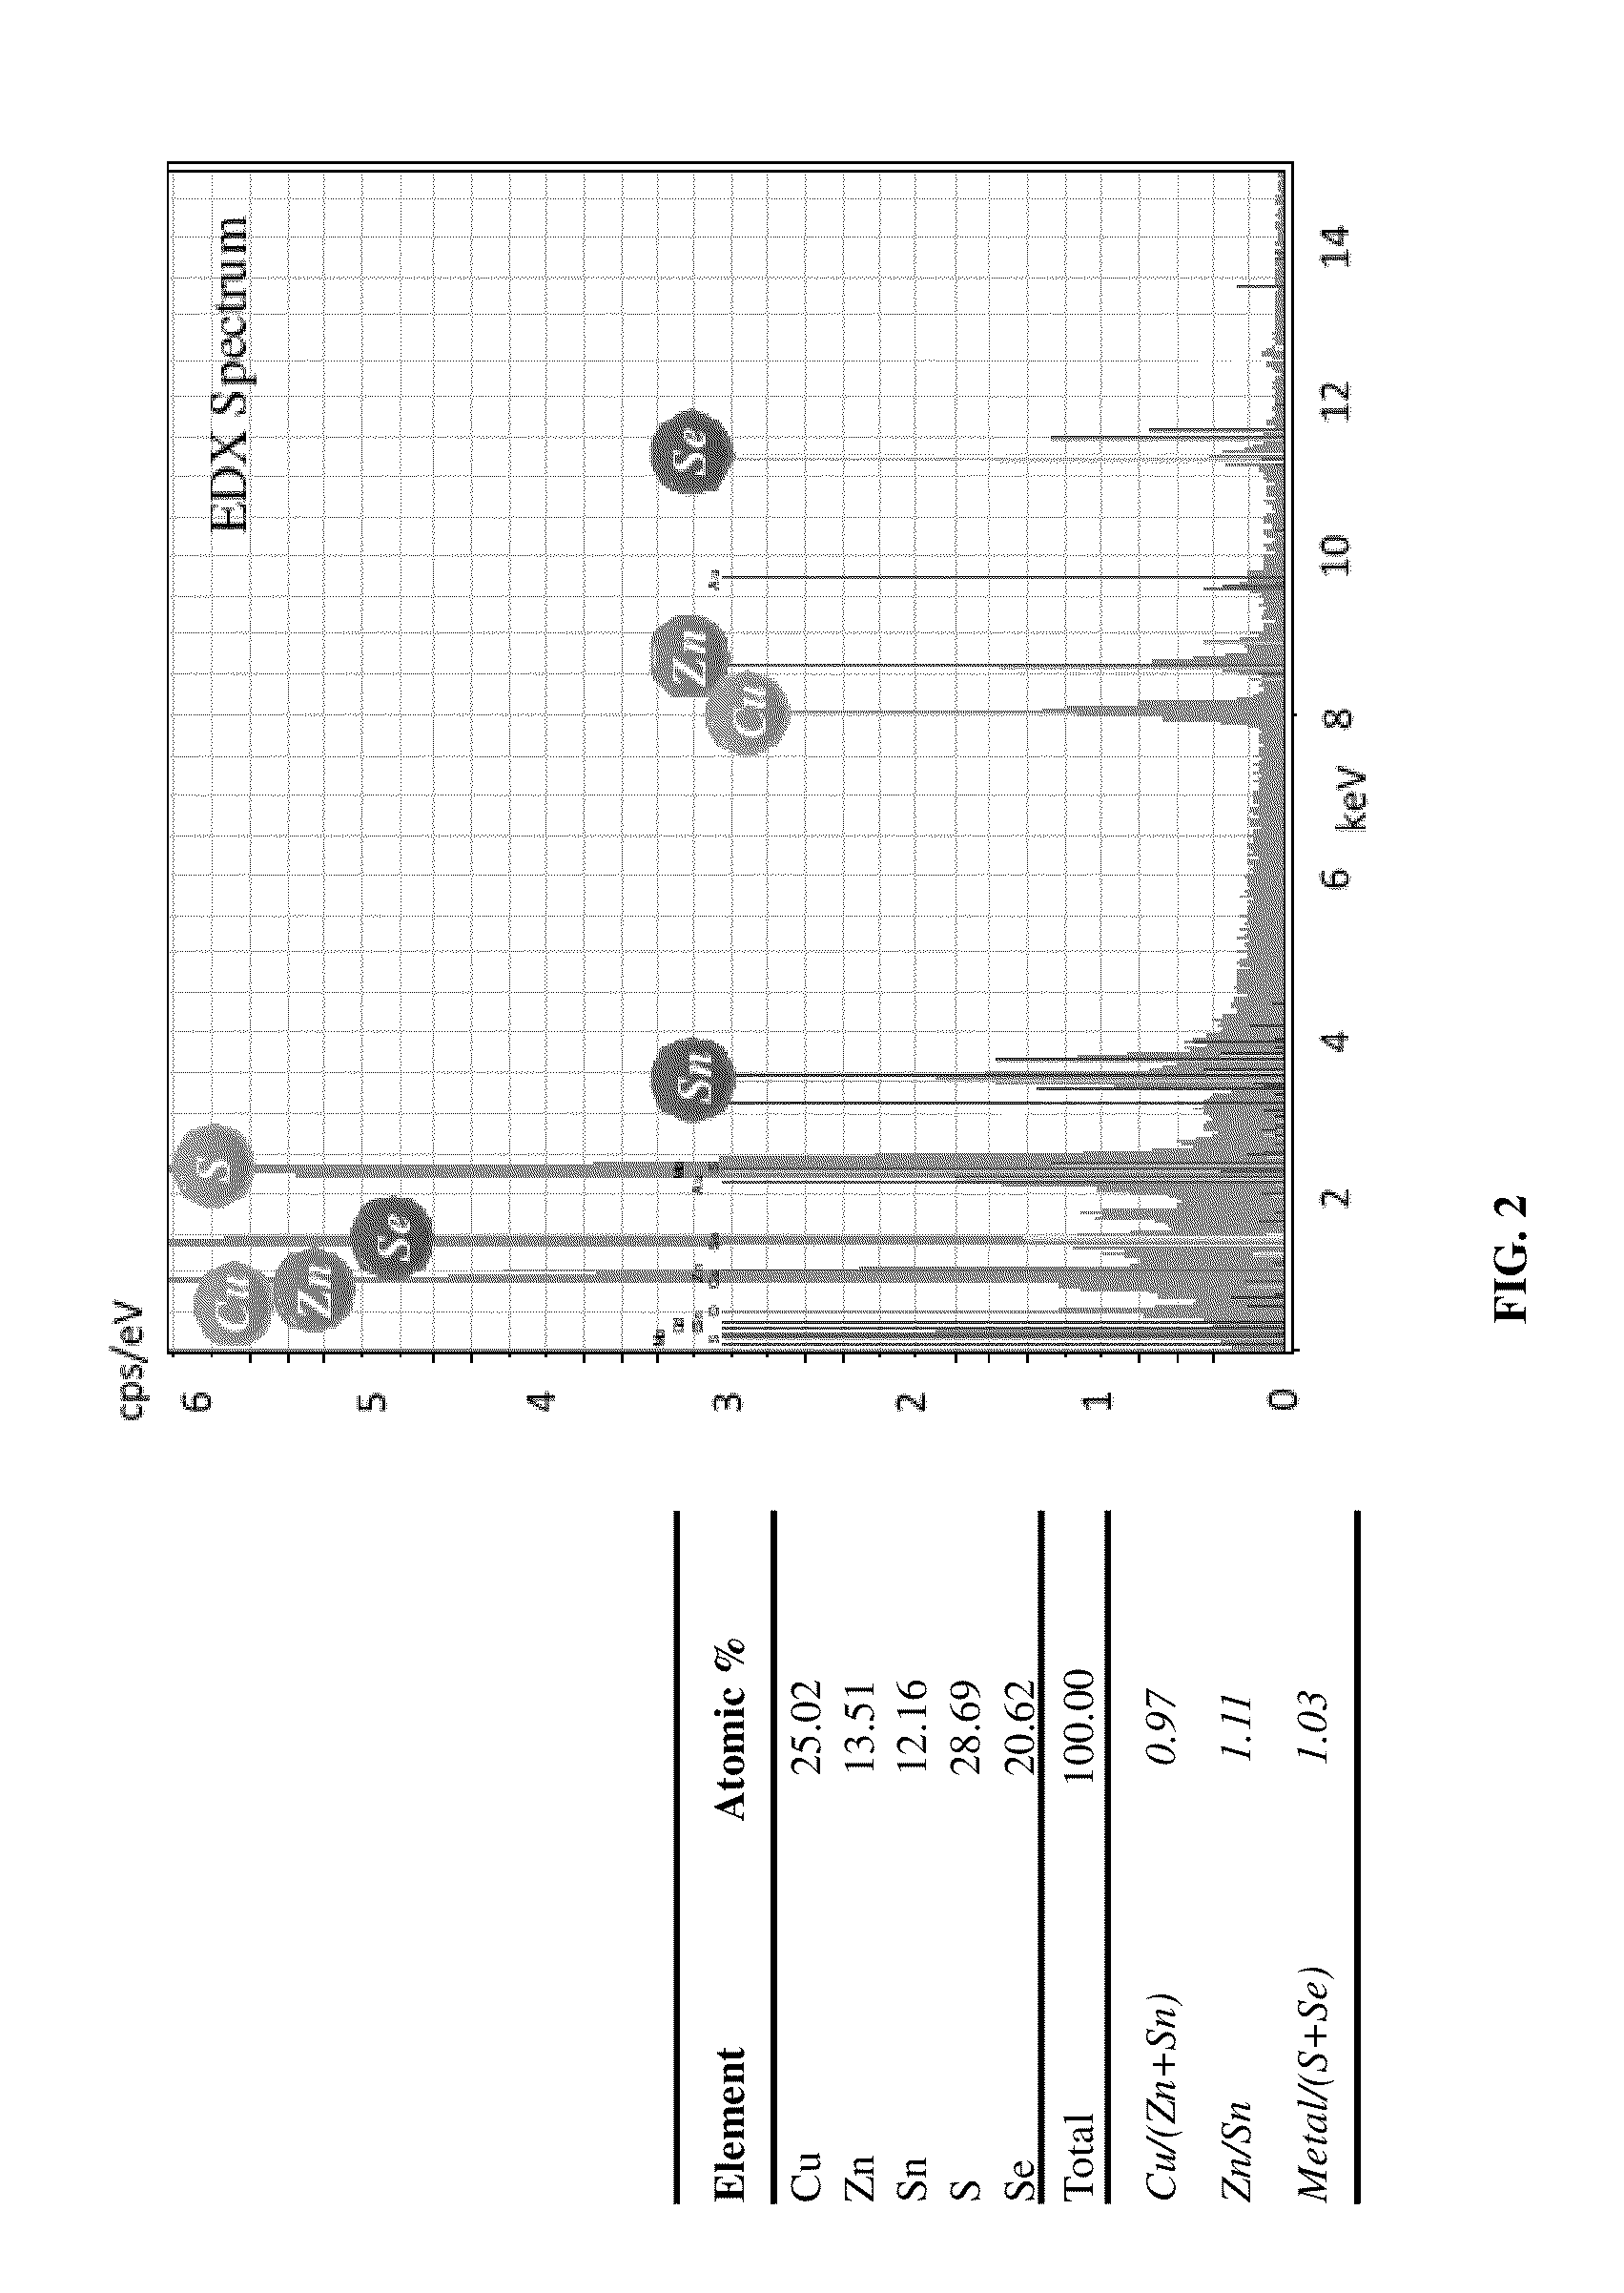 Non-vacuum method of manufacturing light-absorbing materials for solar cell application